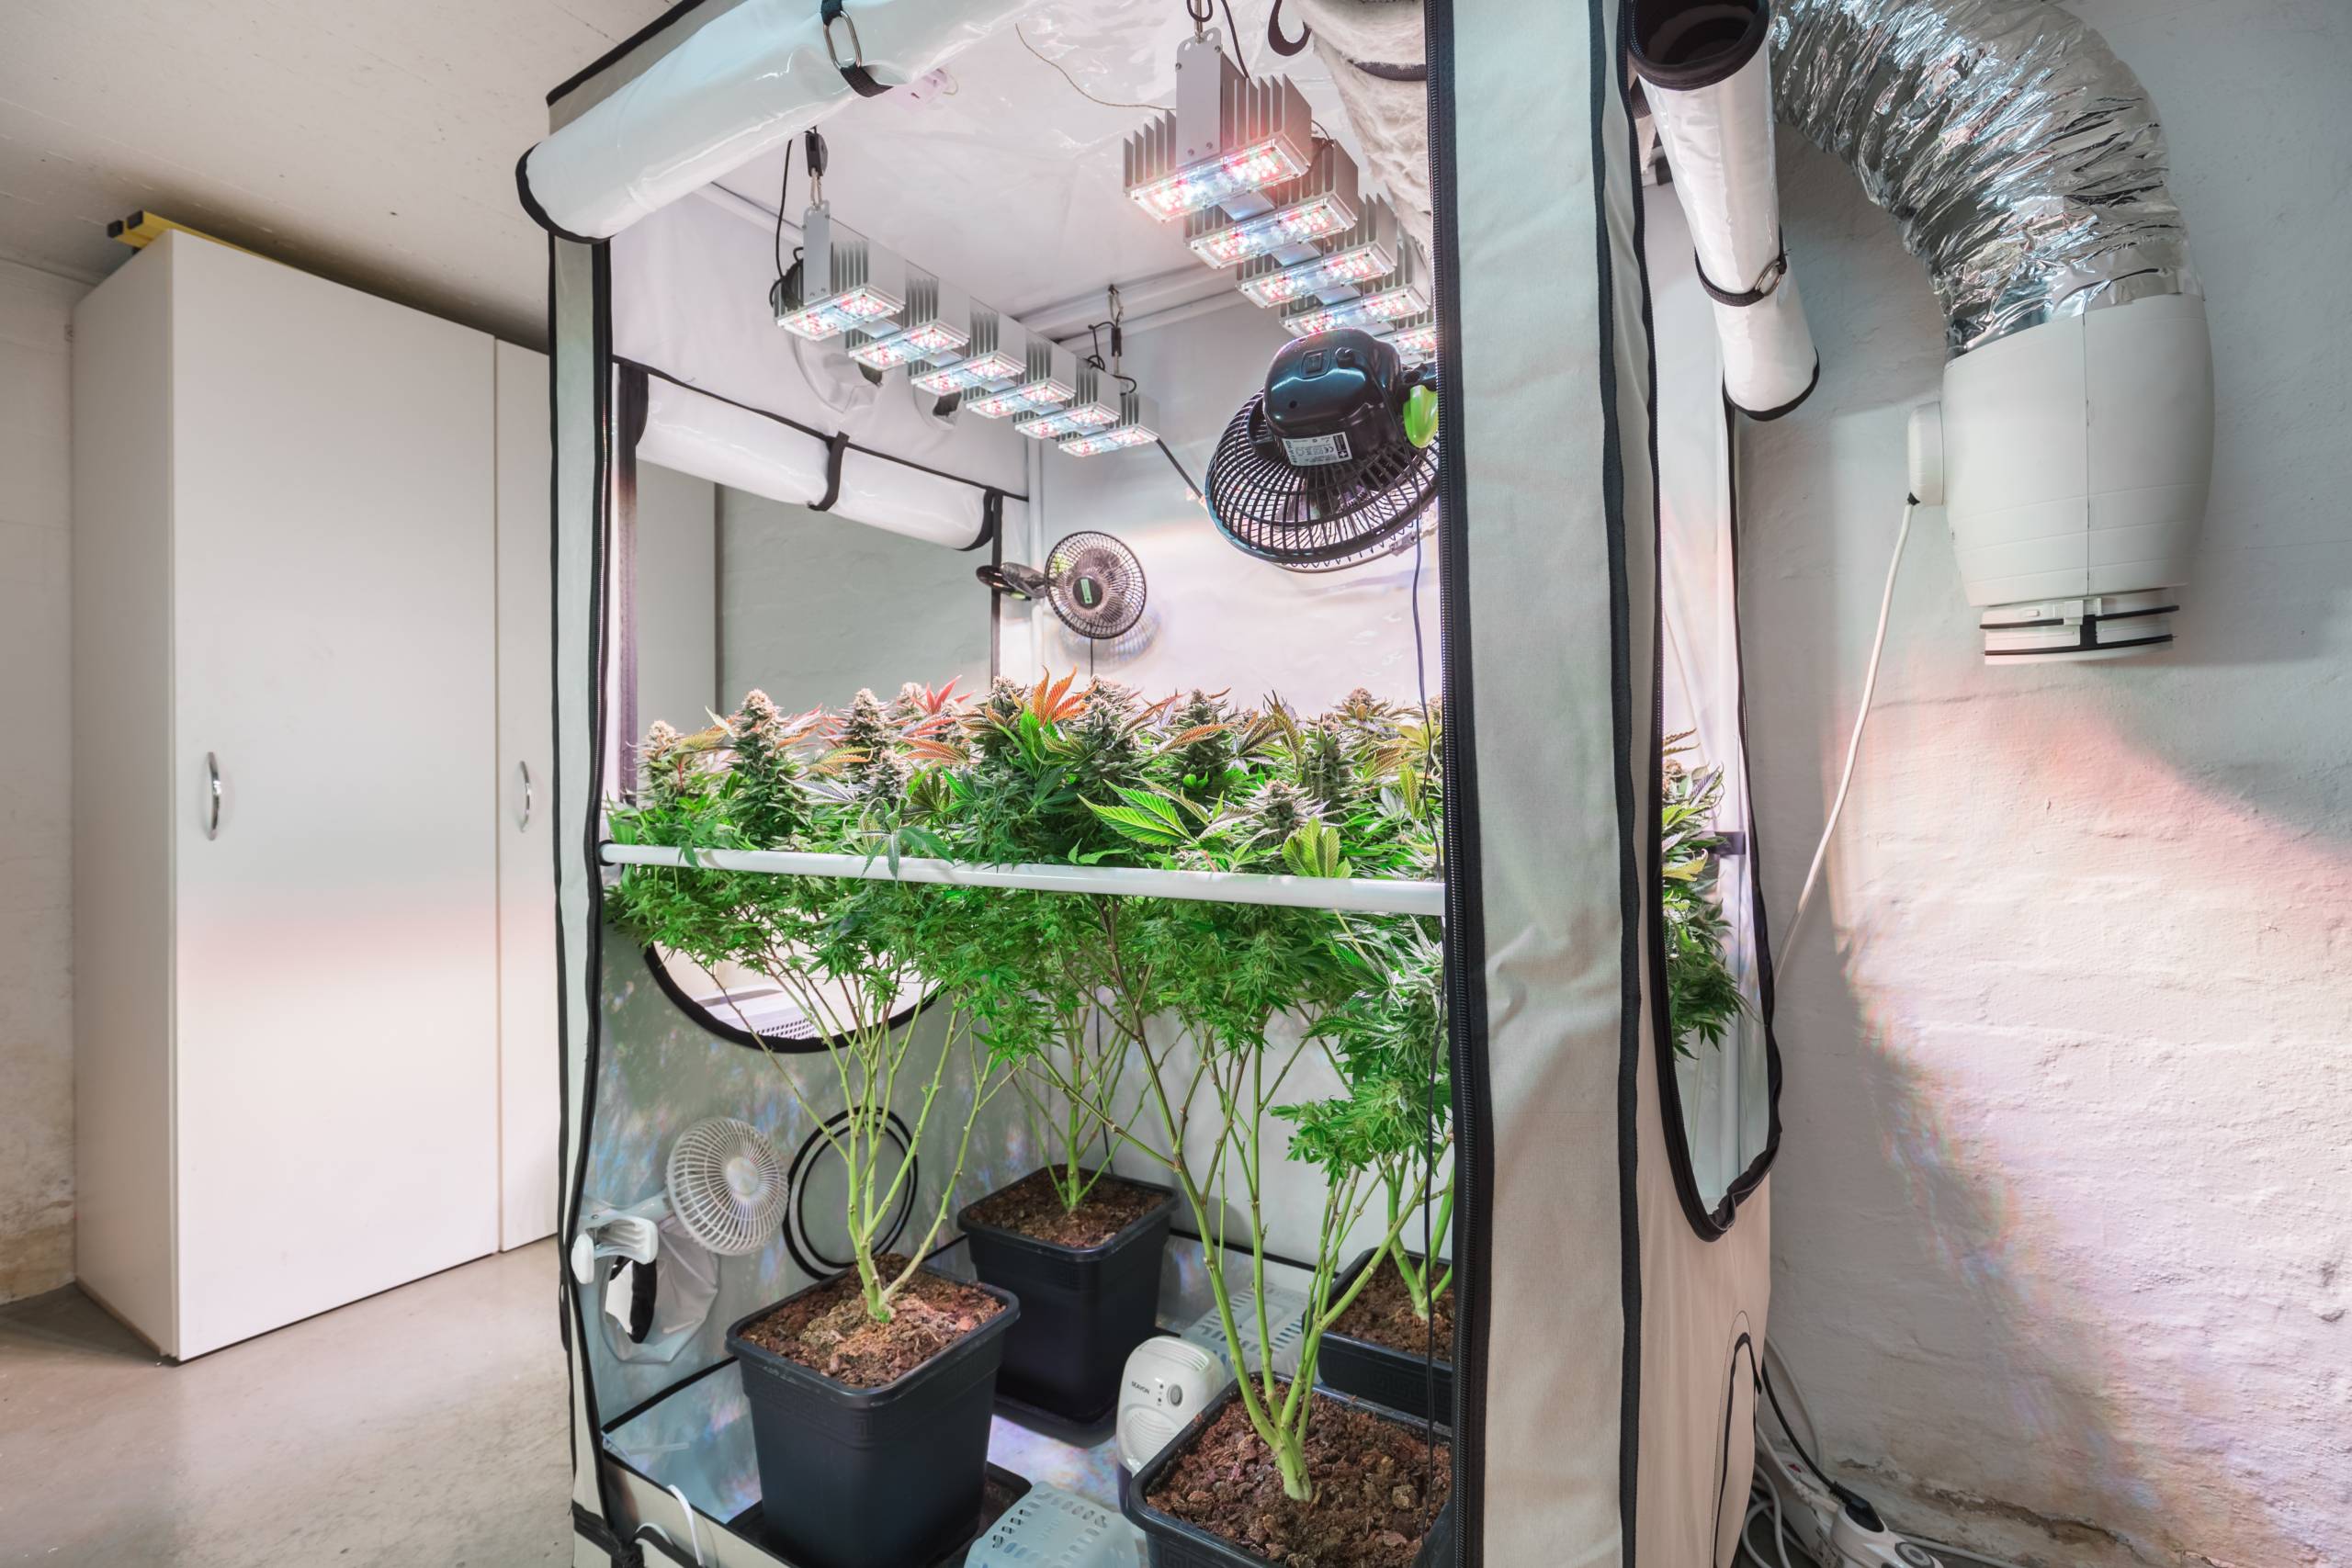 Shot of a cannabis plants growing in a grow tent during flowering stage. Growing marijuana laws. SpeedGreens.